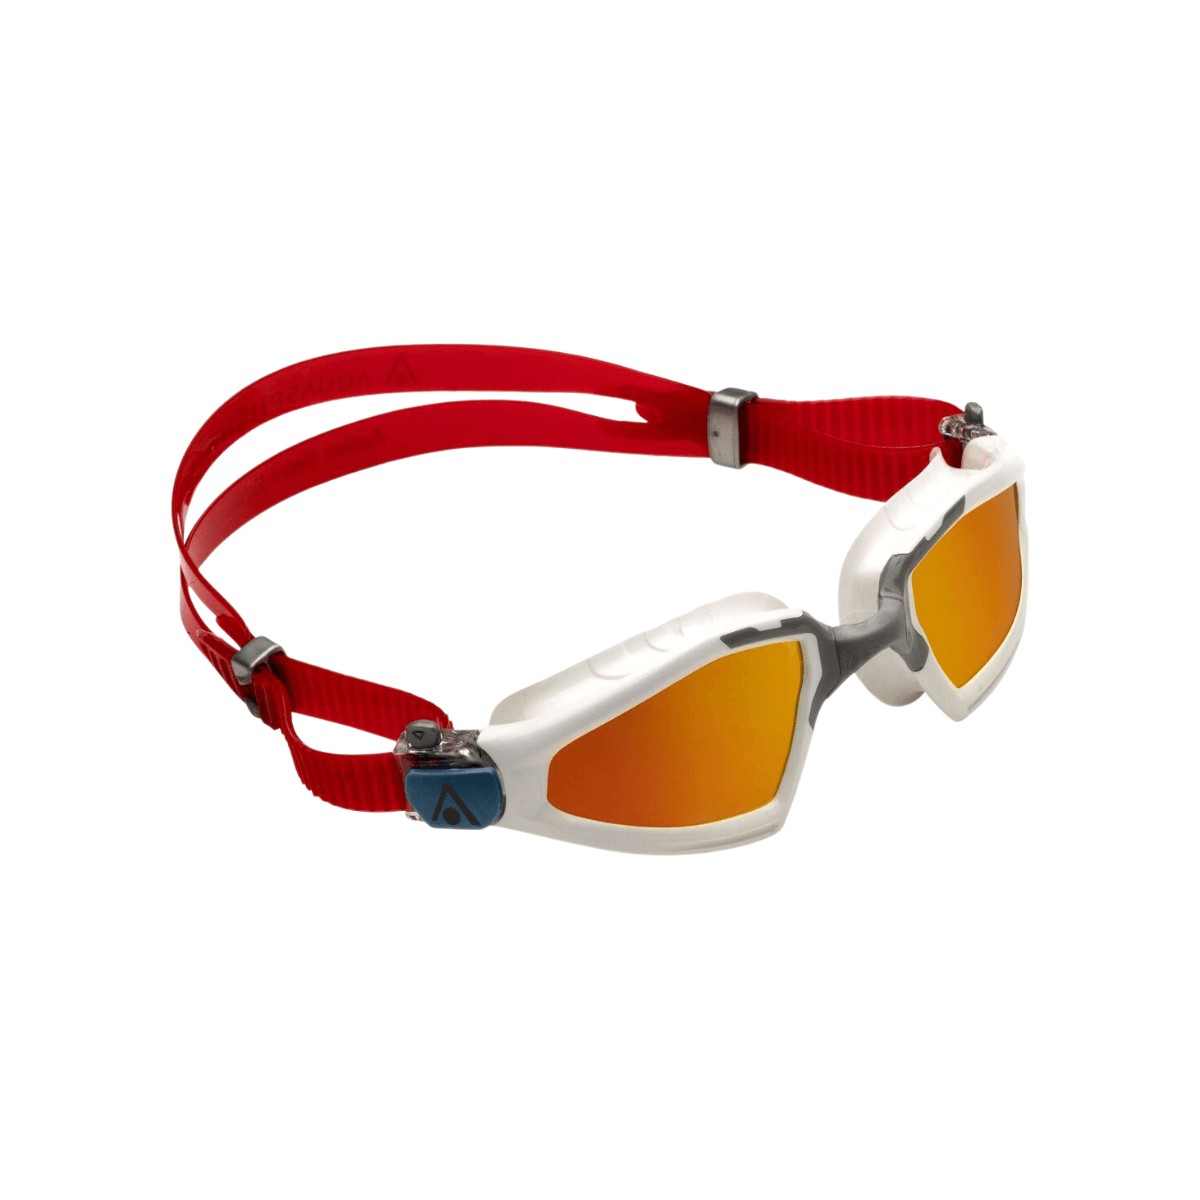 Photos - Swim Goggles Aqua Sphere Kayenne Pro.A Swimming Goggles Red with mirrowed lenses EP3040 